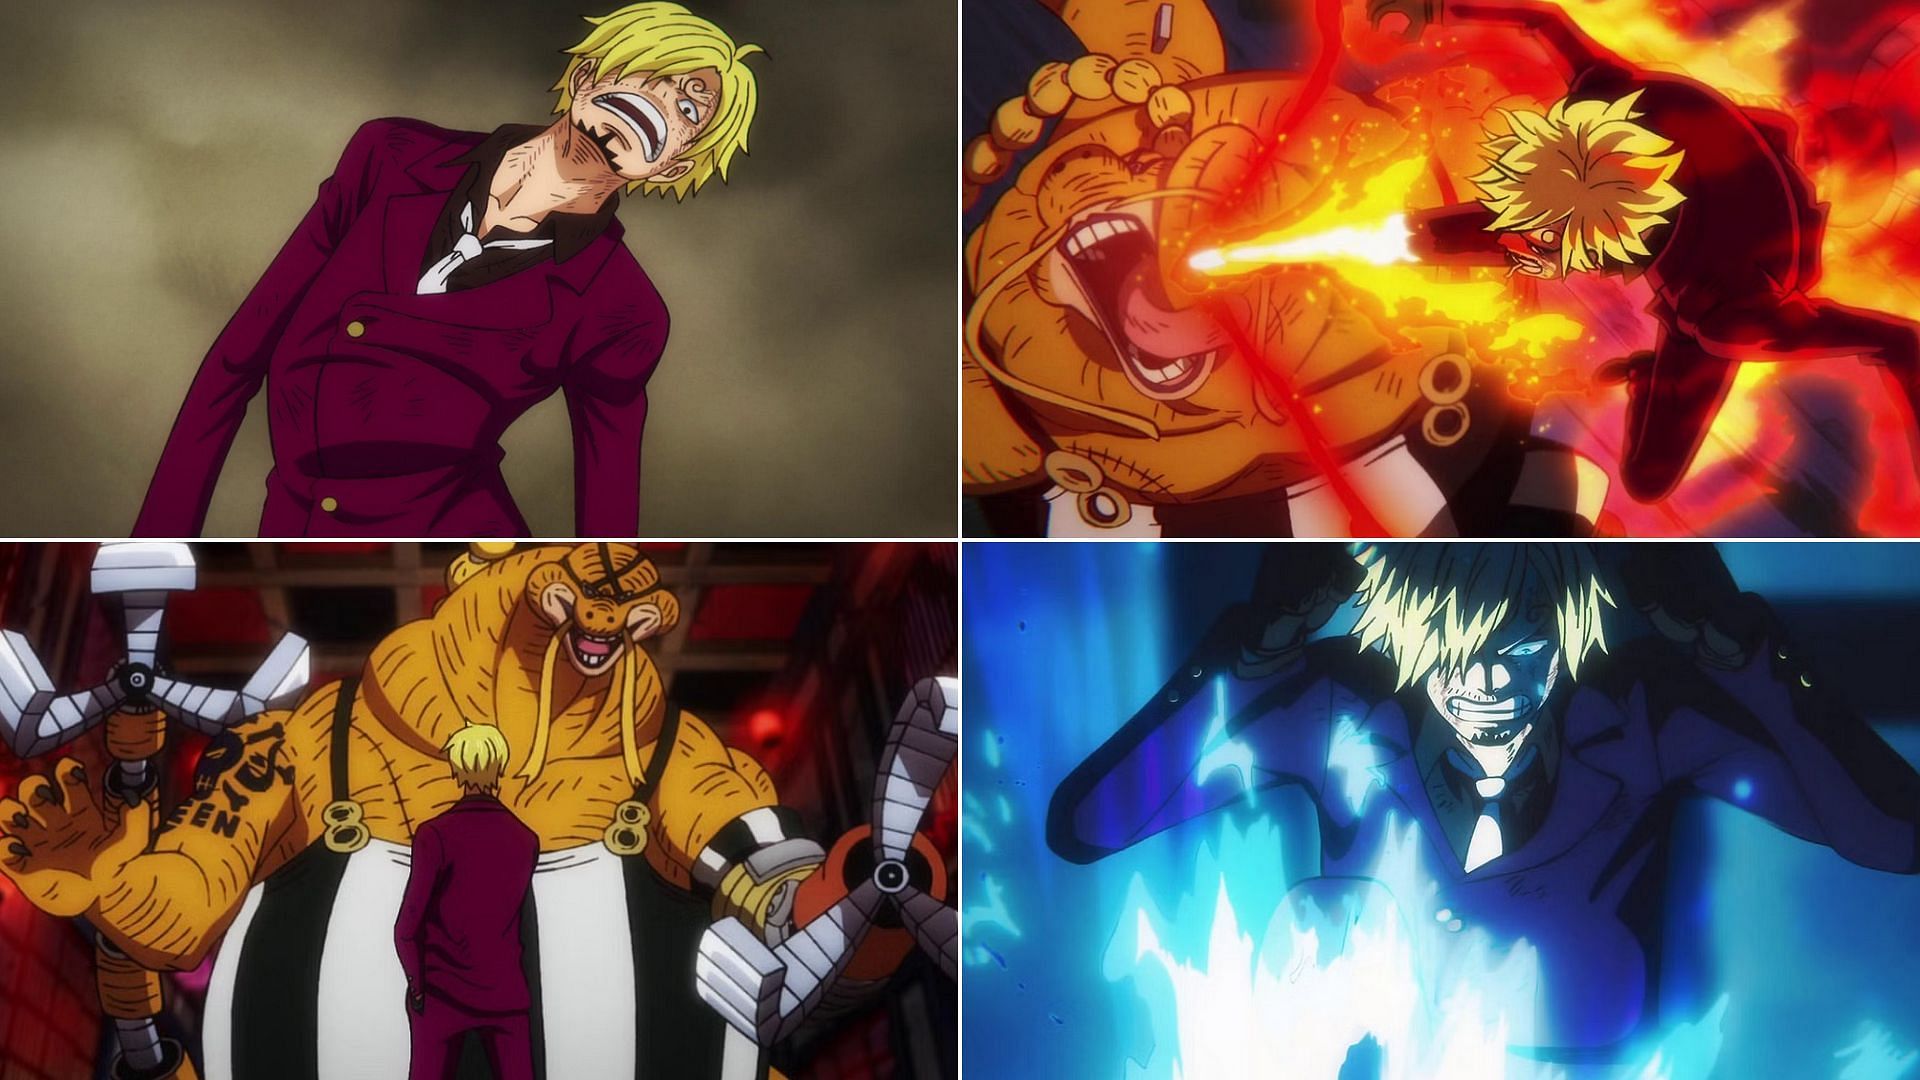 Sanji vs Queen as seen in One Piece (Image via Toei Animation, One Piece)